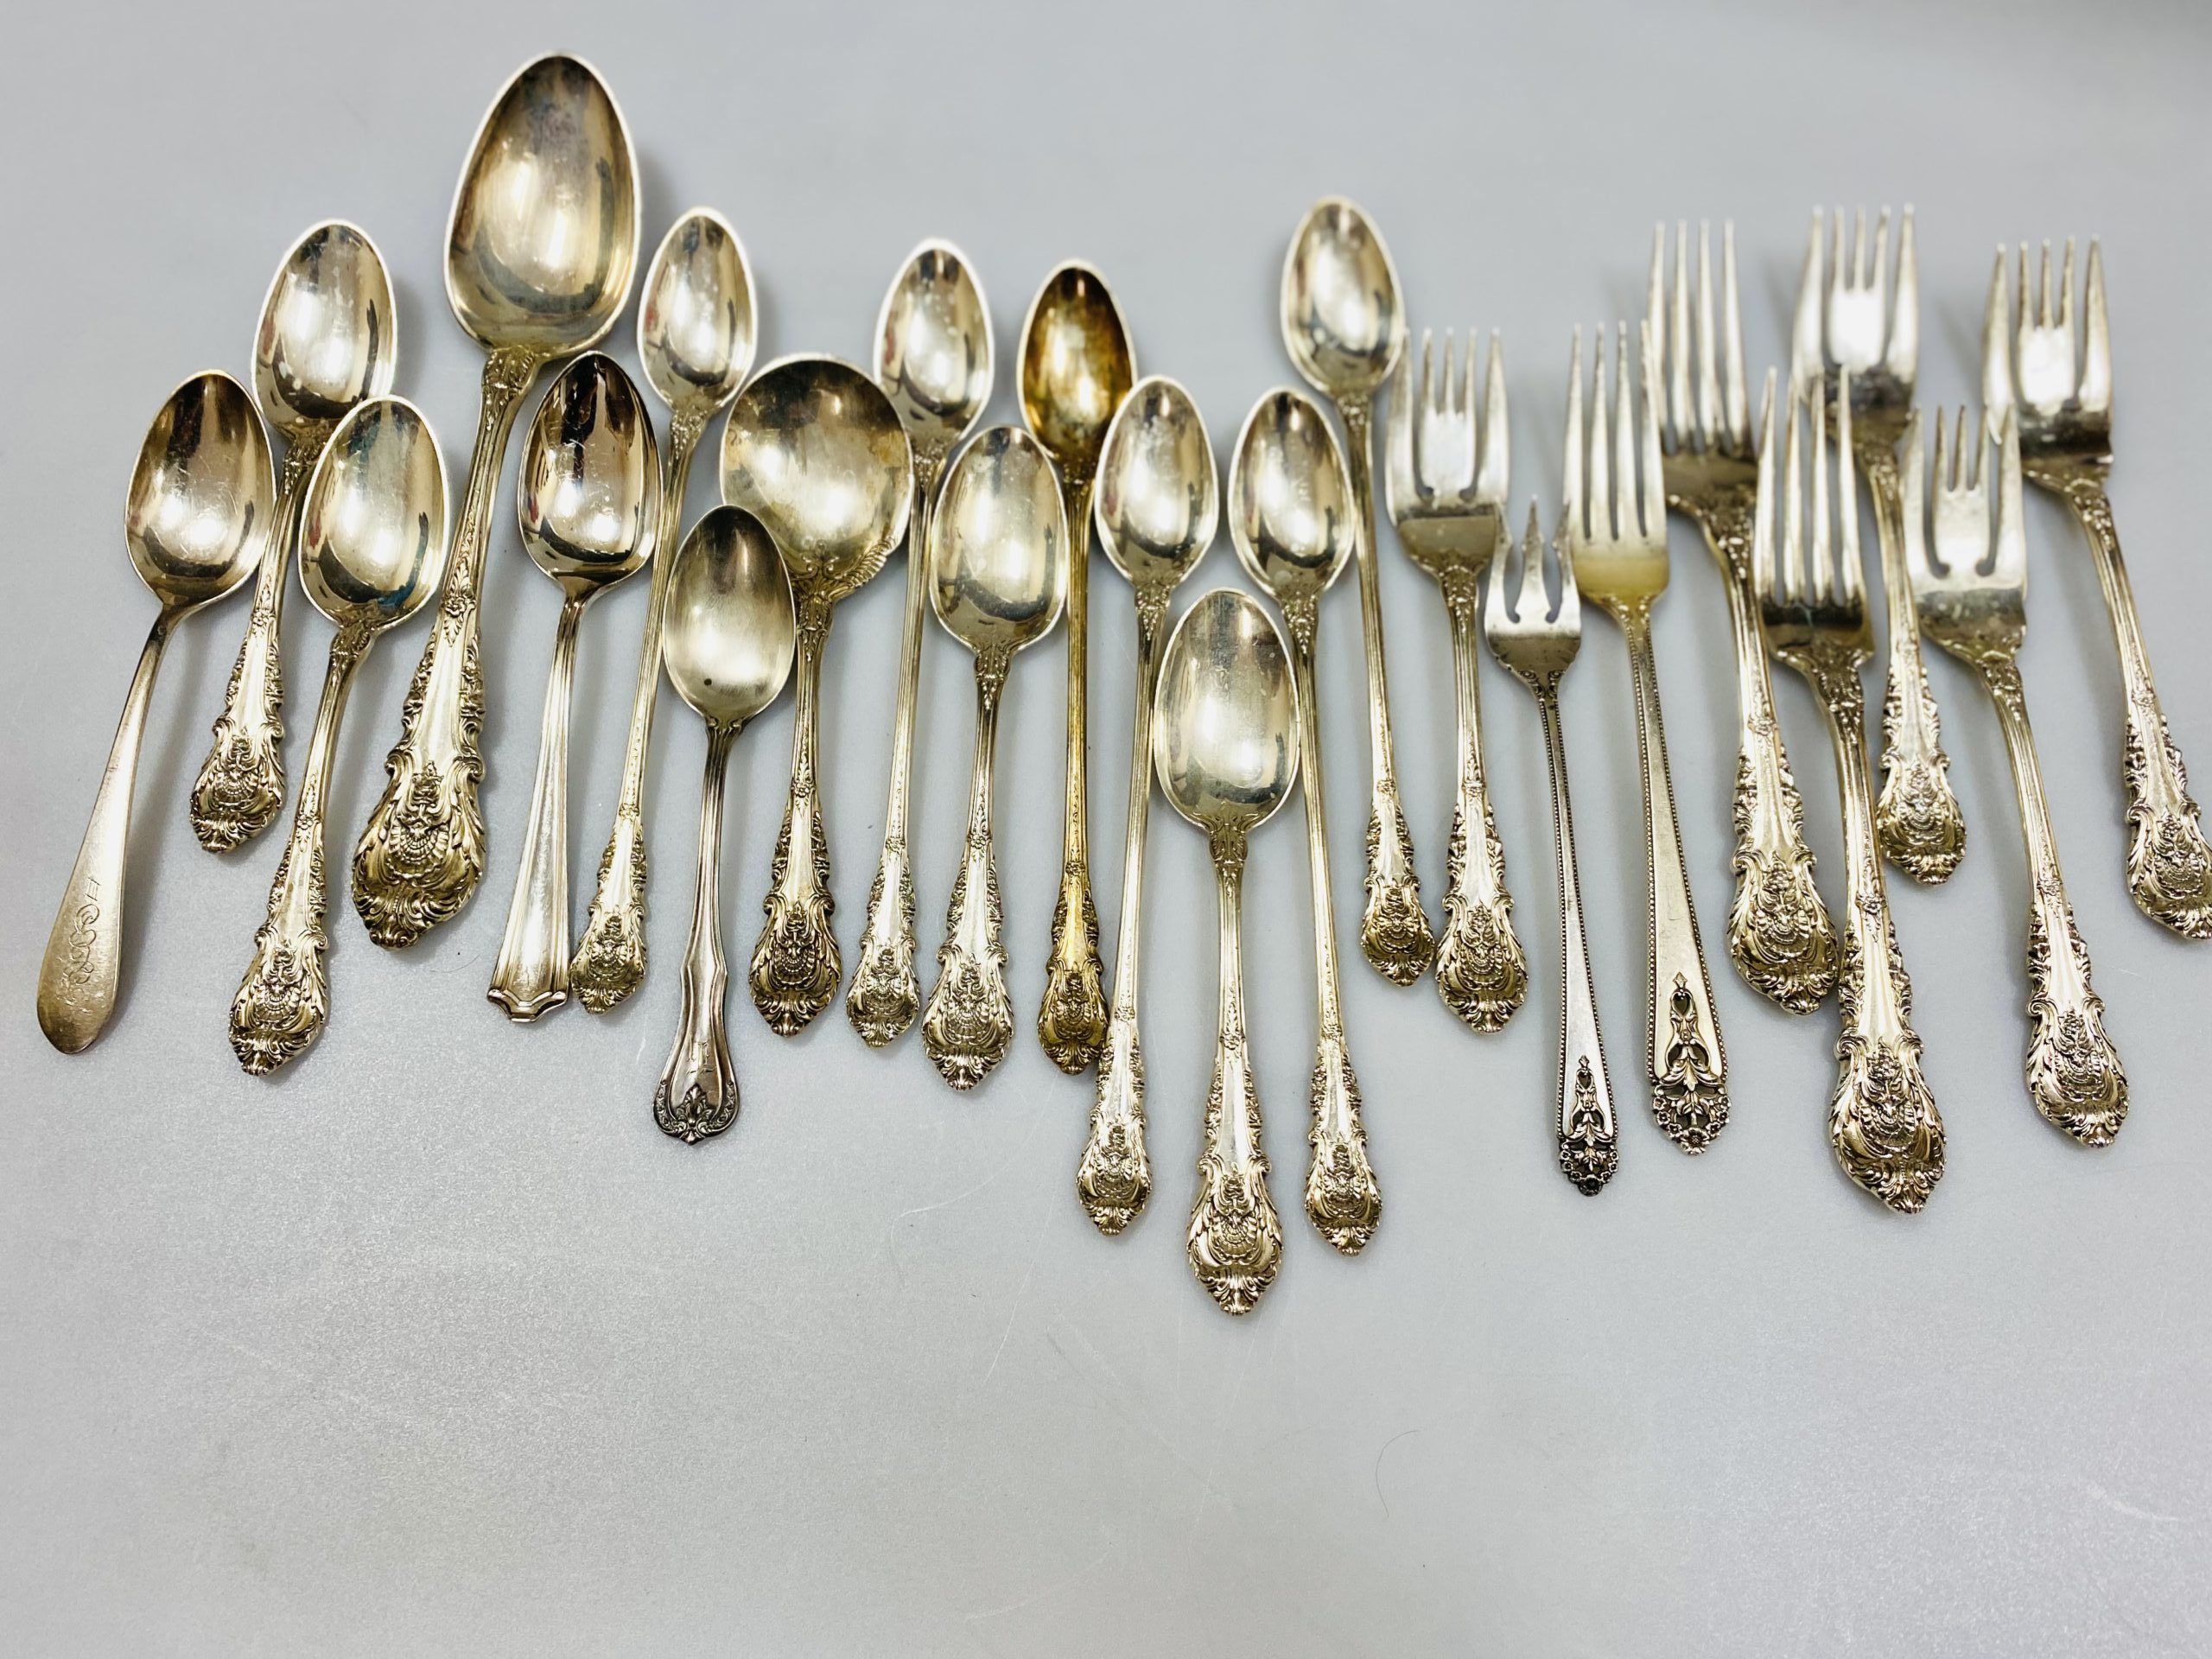 Looking to Buy Silver Flatware. Here Are 10 Key Things to Consider